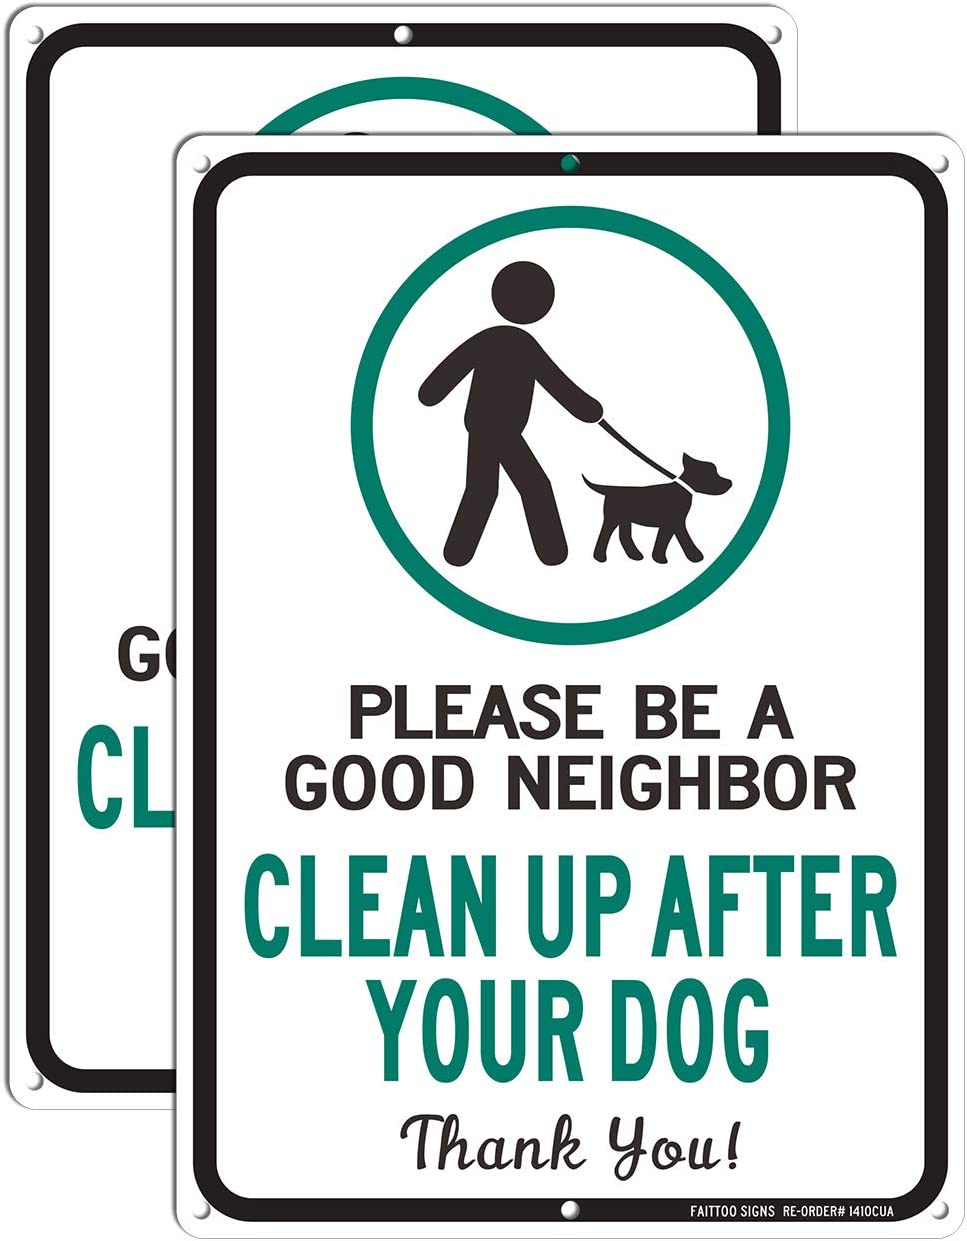 Clean Up After Your Dog Sign 2 Pack, Please Be a Good Neighbor, Clean Up After Your Pets, Be a Good Neighbor Sign, 14x10 Rust Free .40 Aluminum UV Printed, Easy to Mount Weather Resistant, Non-fading